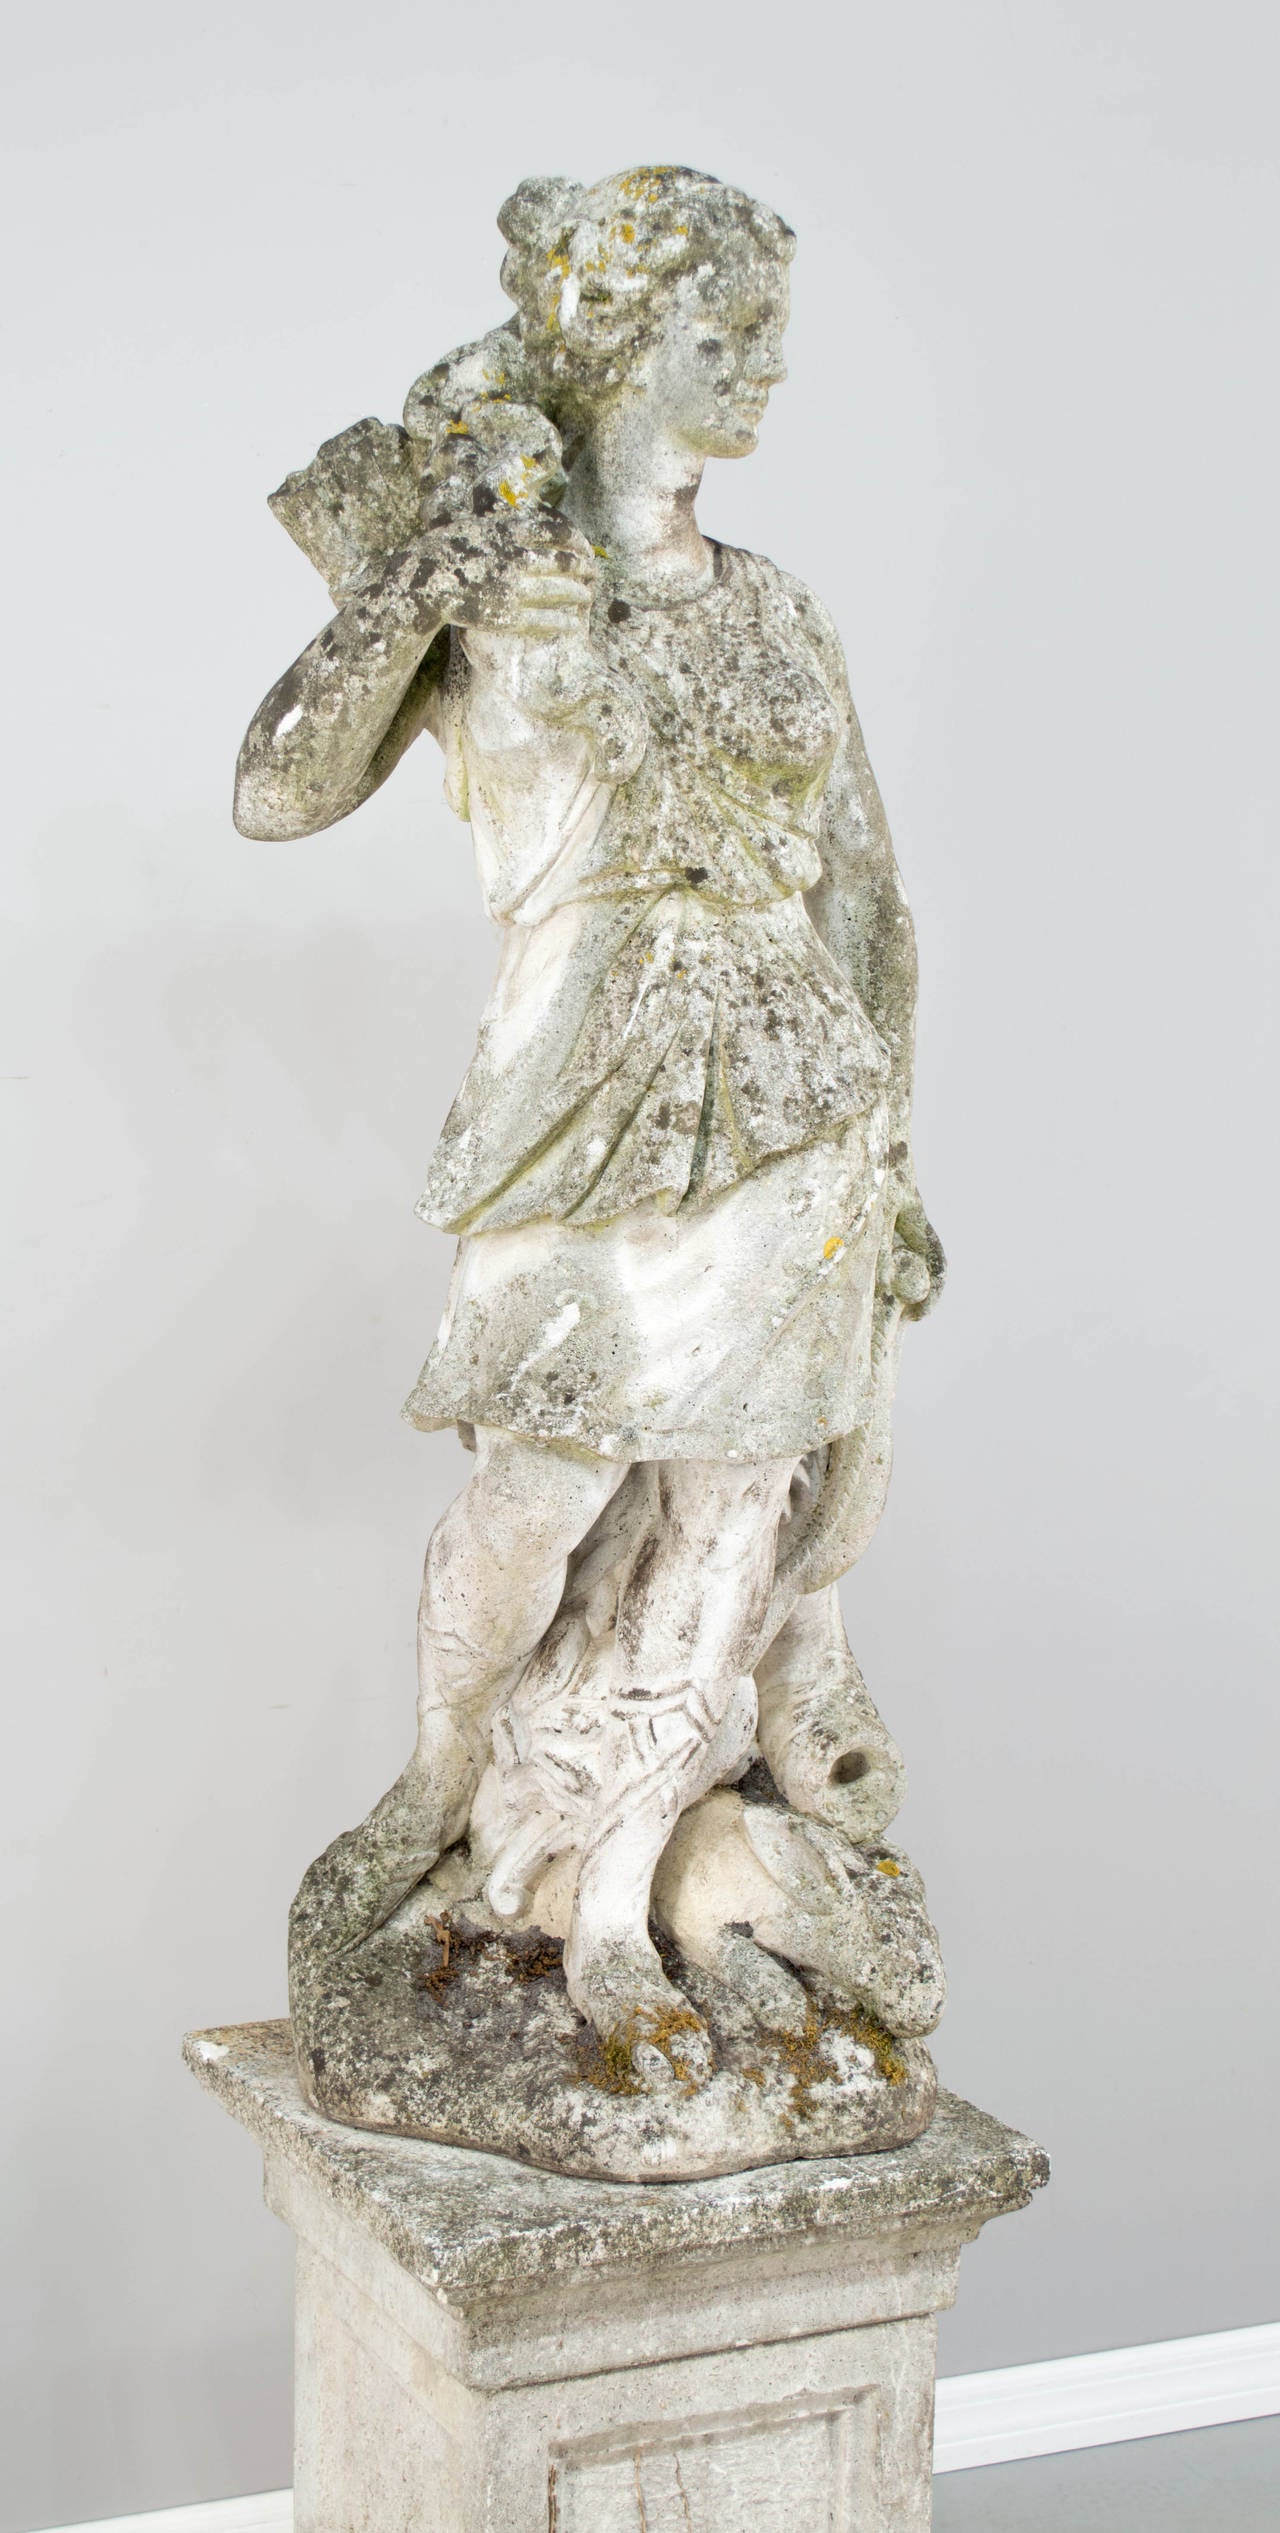 French cast stone garden statue of the Greek goddess, Diana the Hunter, depicted holding her bow at her side, a quiver over her shoulder and a rabbit at her feet. Very detailed and with nice old mossy patina. This large statue rests on a separate